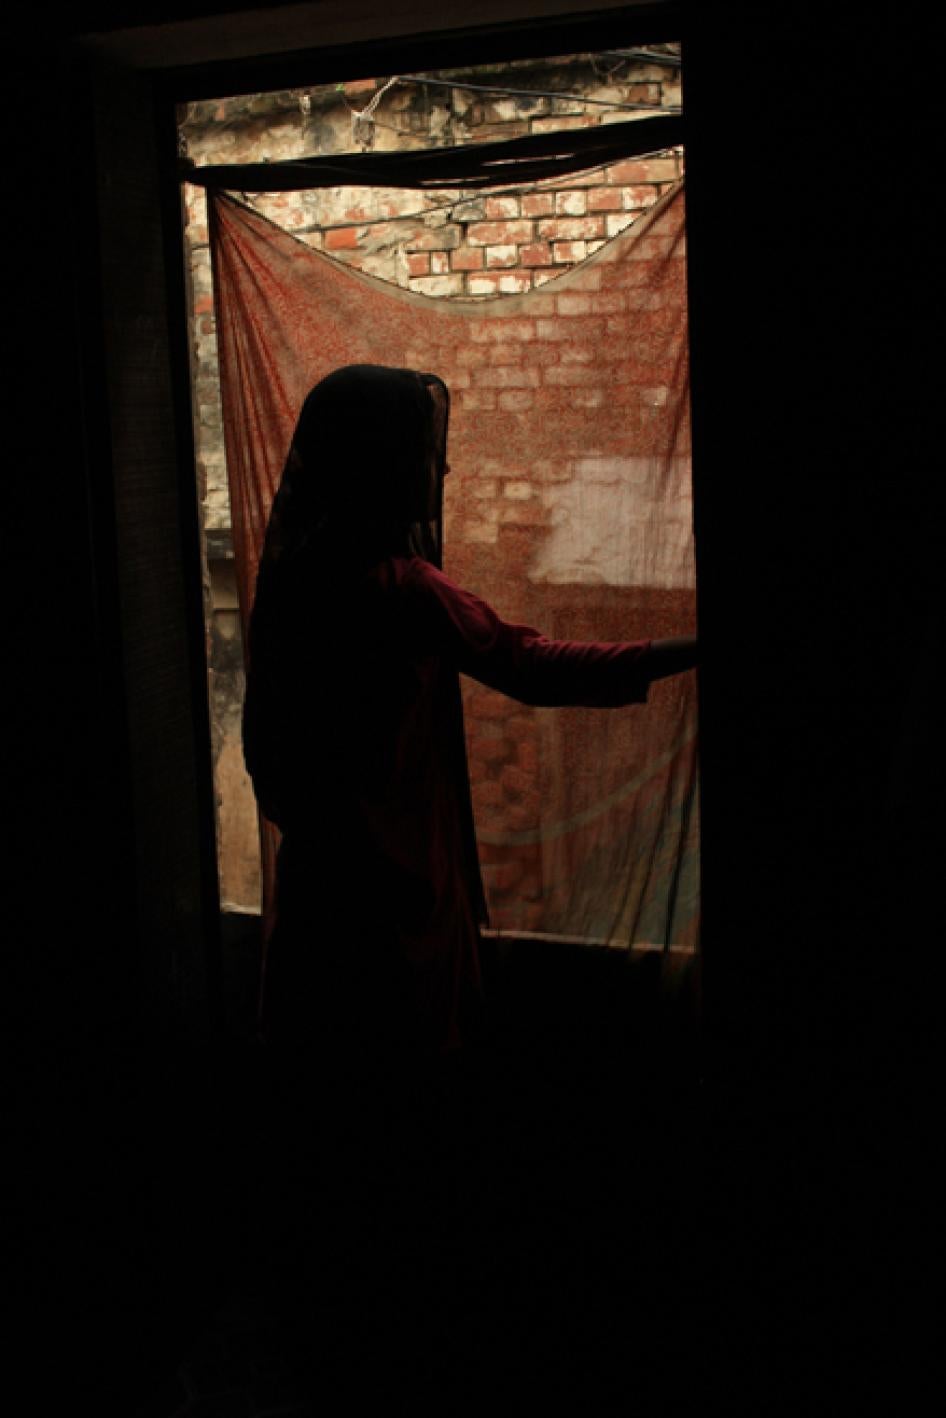 South Asia Failing to Address Its Child Rape Problem Human Rights Watch image